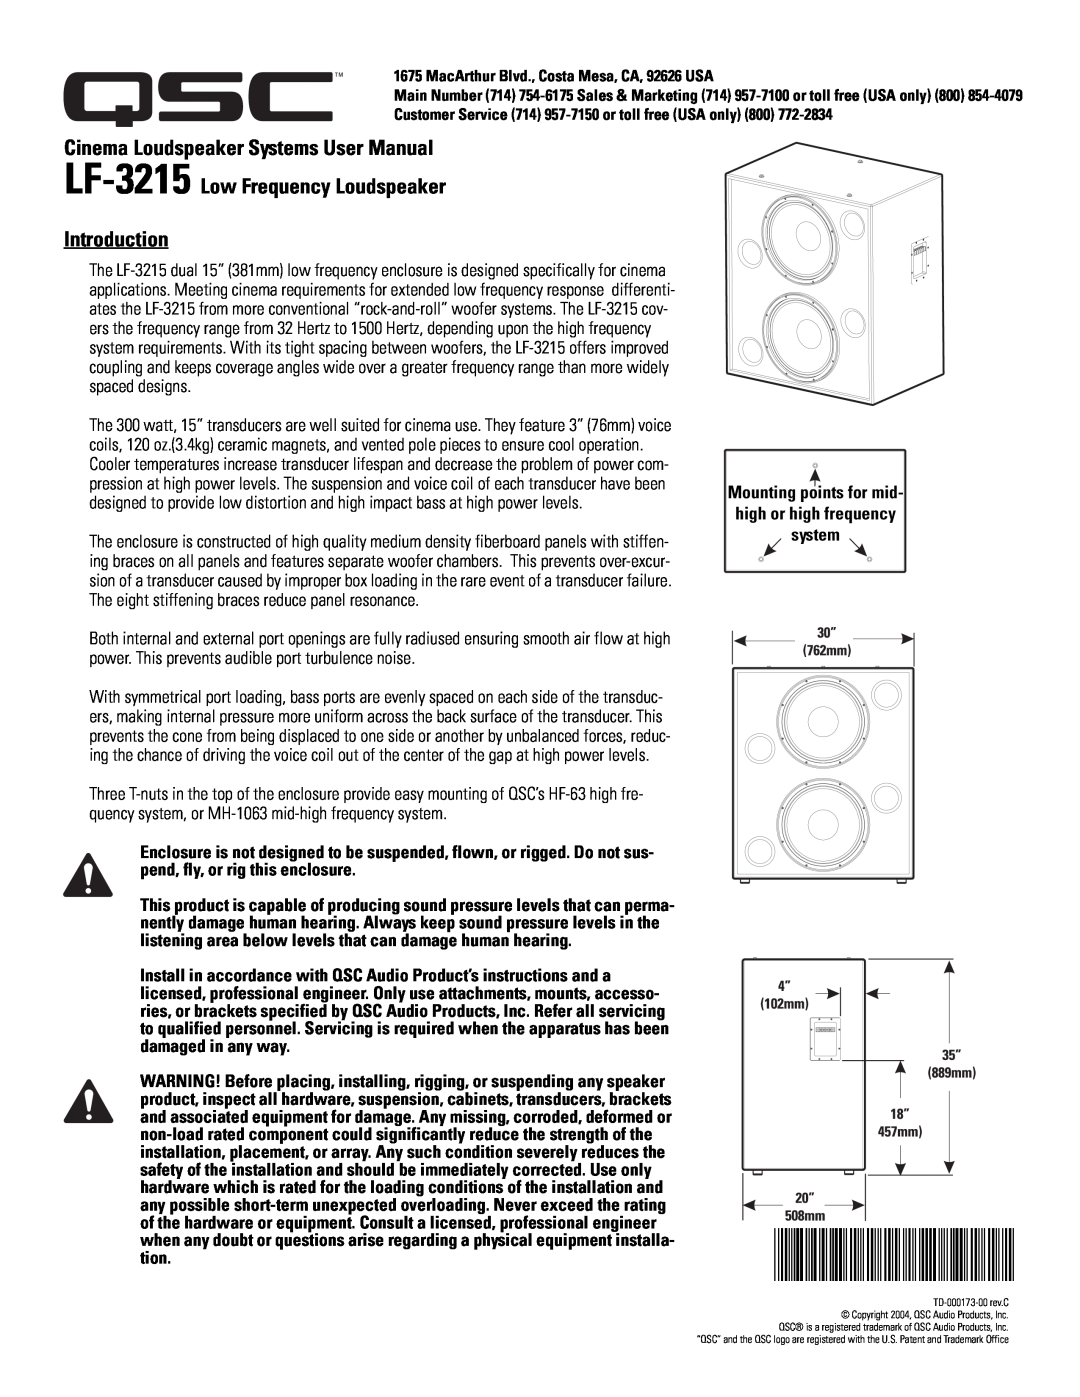 QSC Audio SC-322X specifications LF-3215 Low Frequency Loudspeaker Introduction, TD-000173-00 